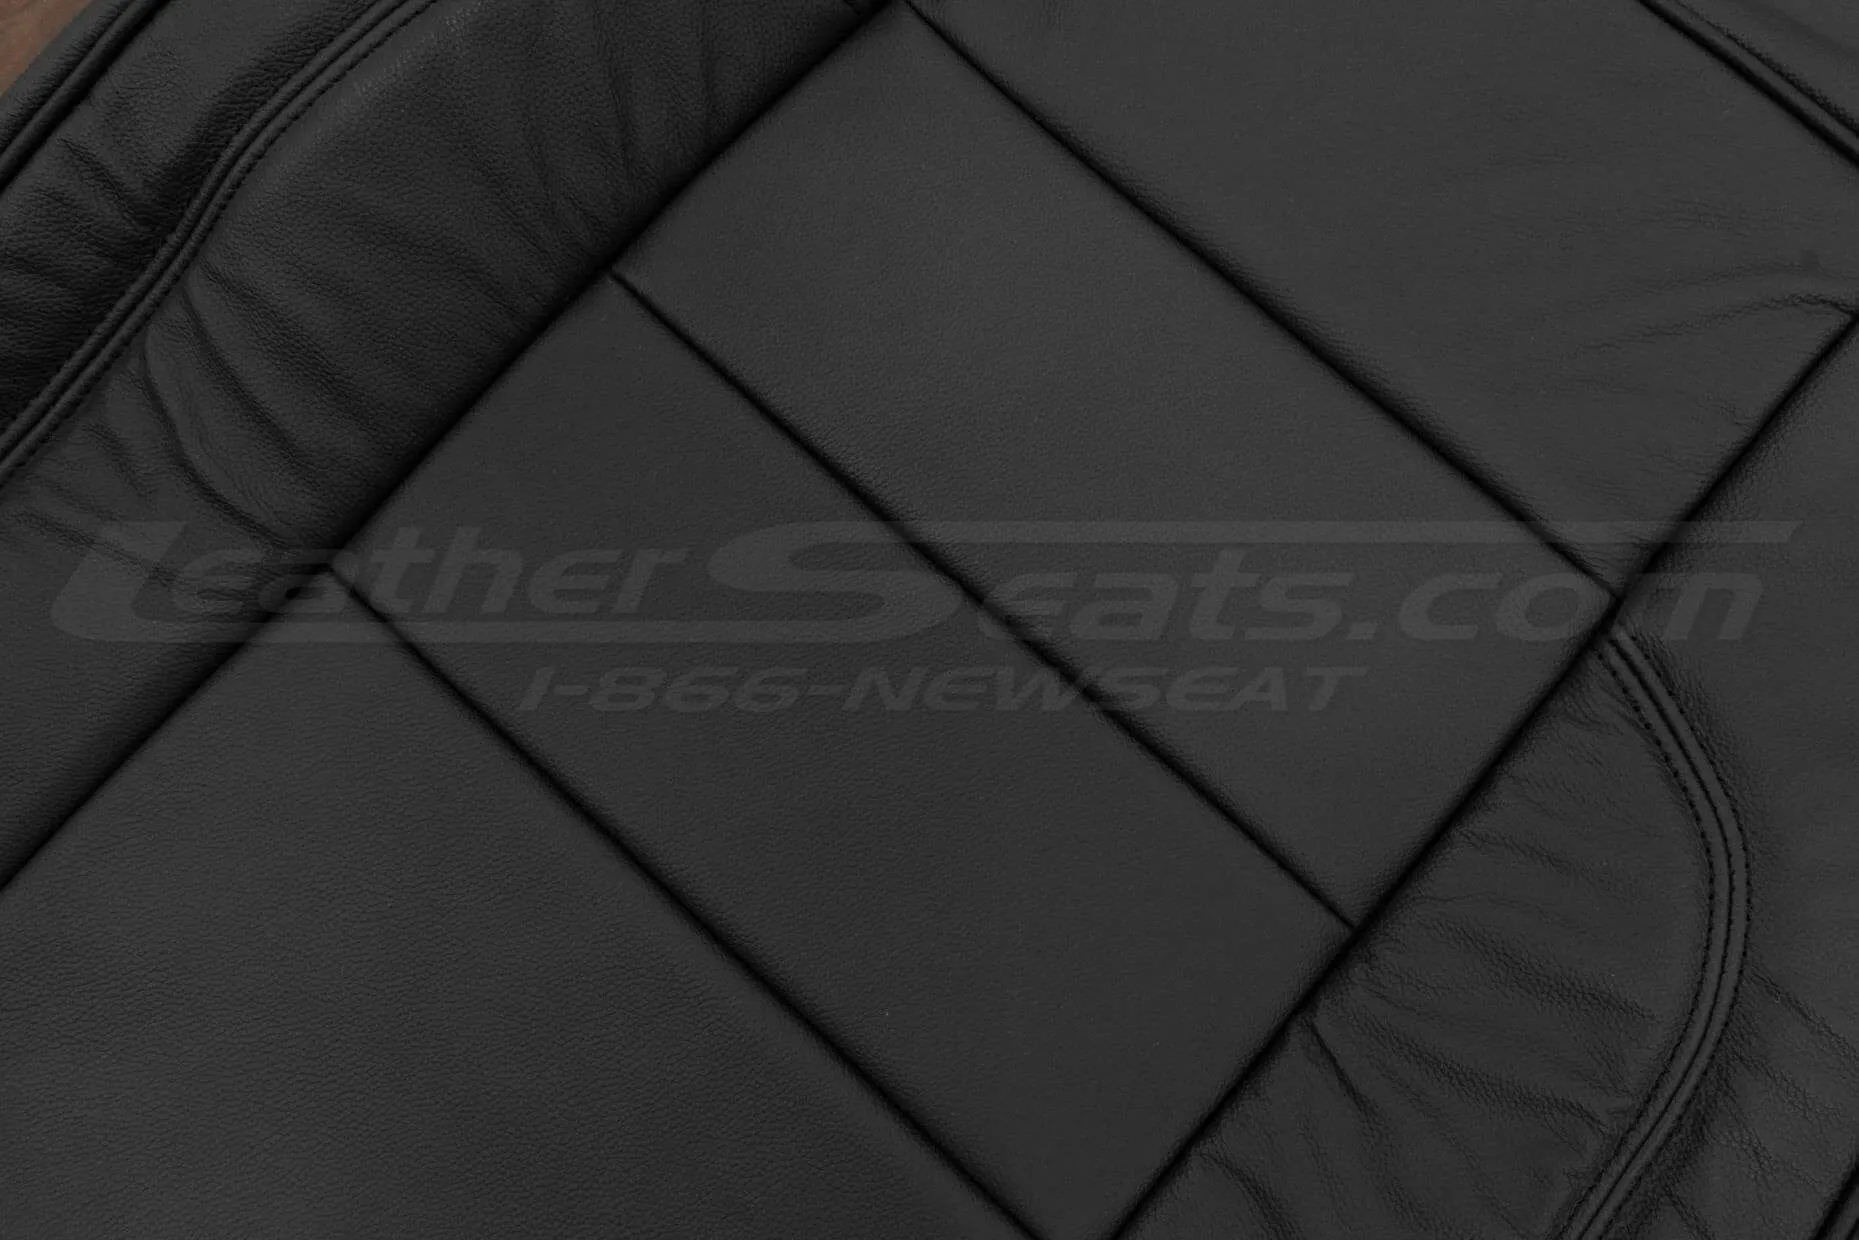 Backrest upholstery leather texture close-up